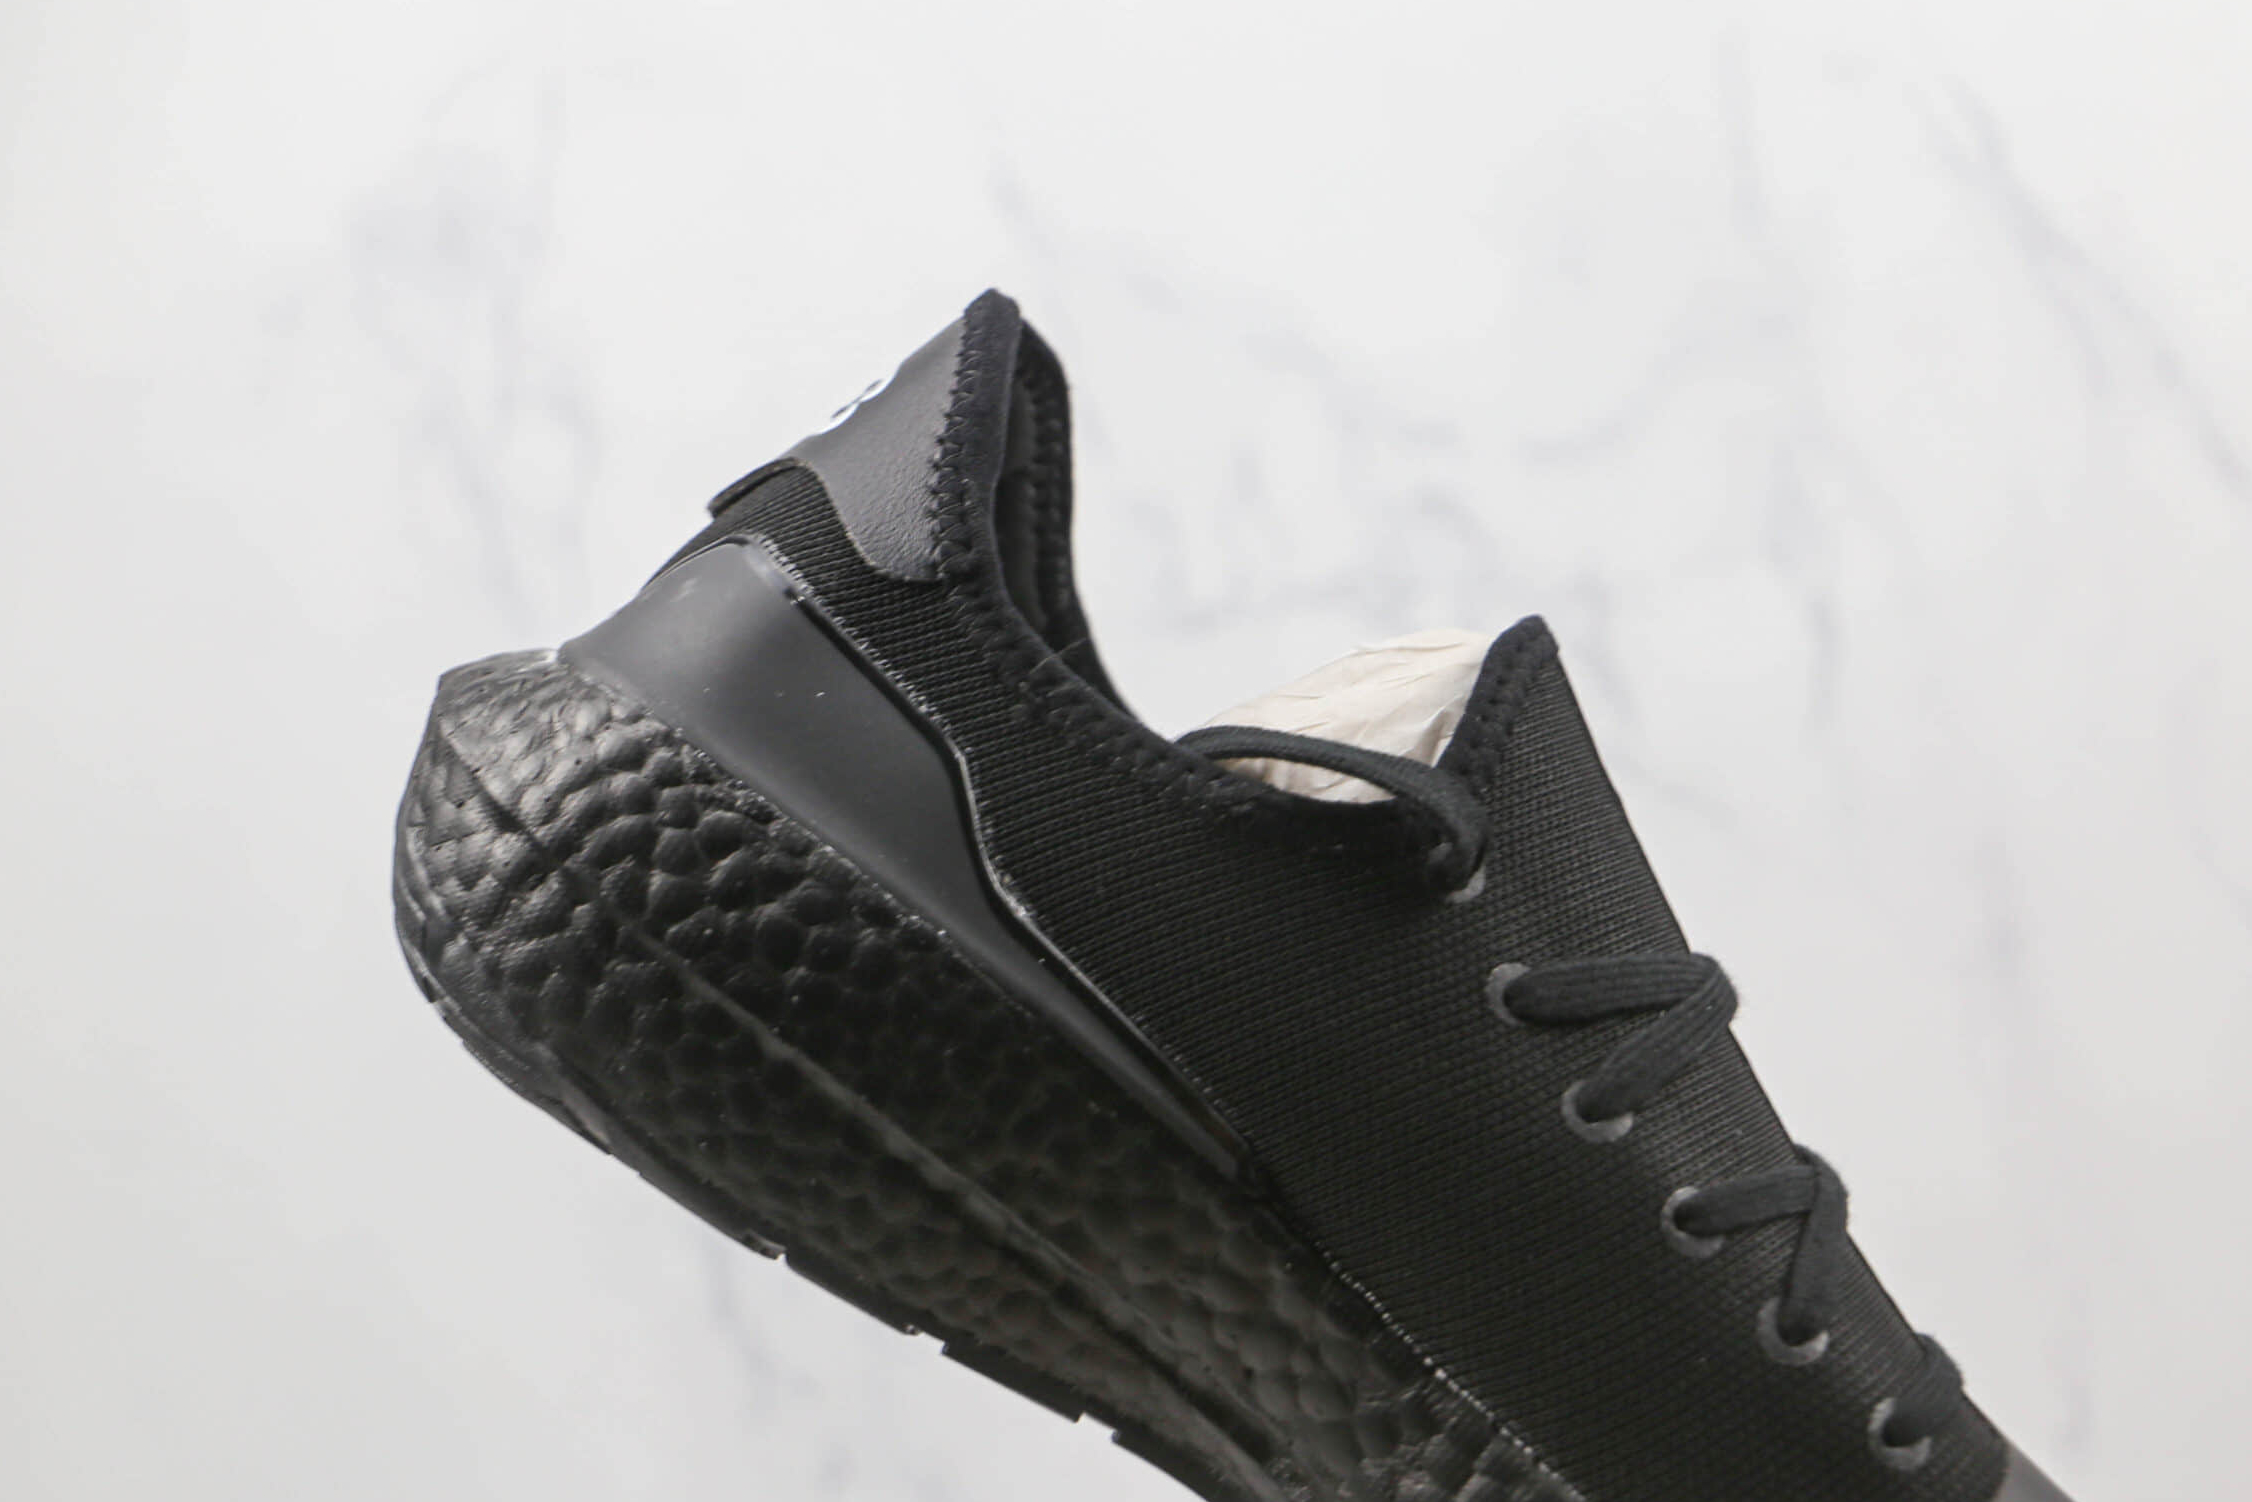 Adidas Y-3 UltraBoost 21 'Black' GZ9133 - Shop the Latest Release Now!